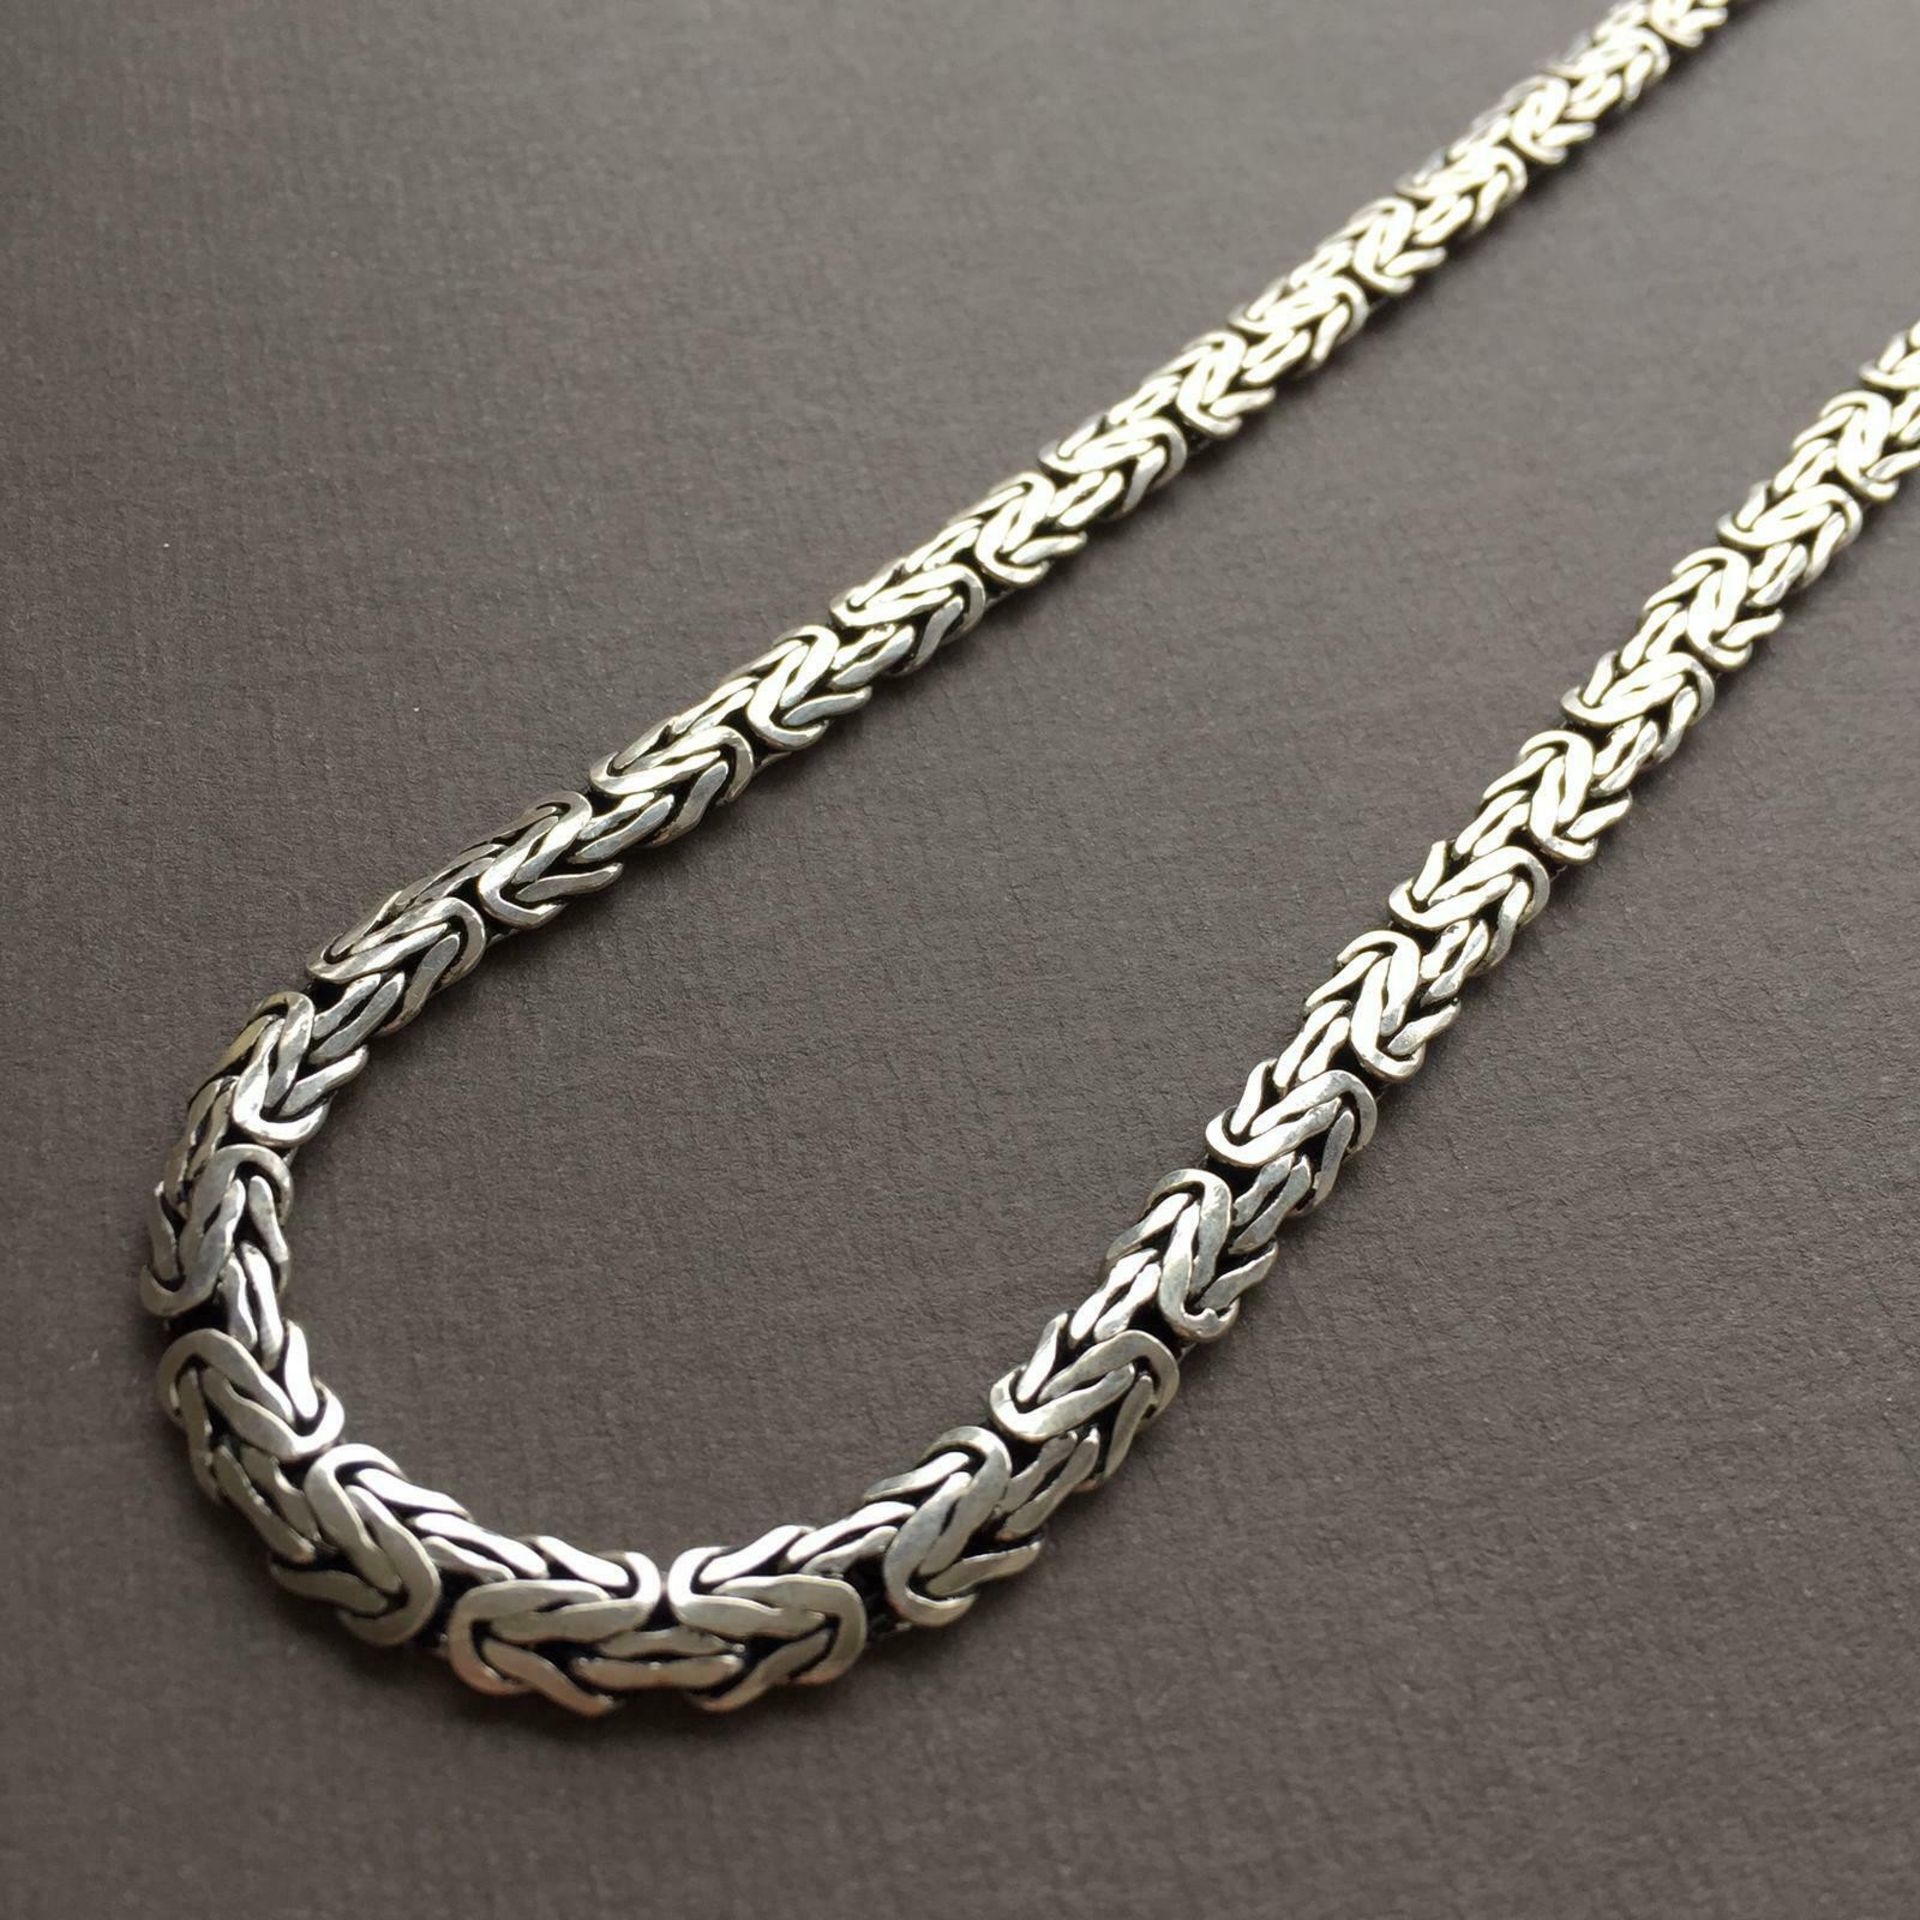 65 Cm / 26 In Men's Bali King Byzantine Chain Necklace 925 Sterling Silver